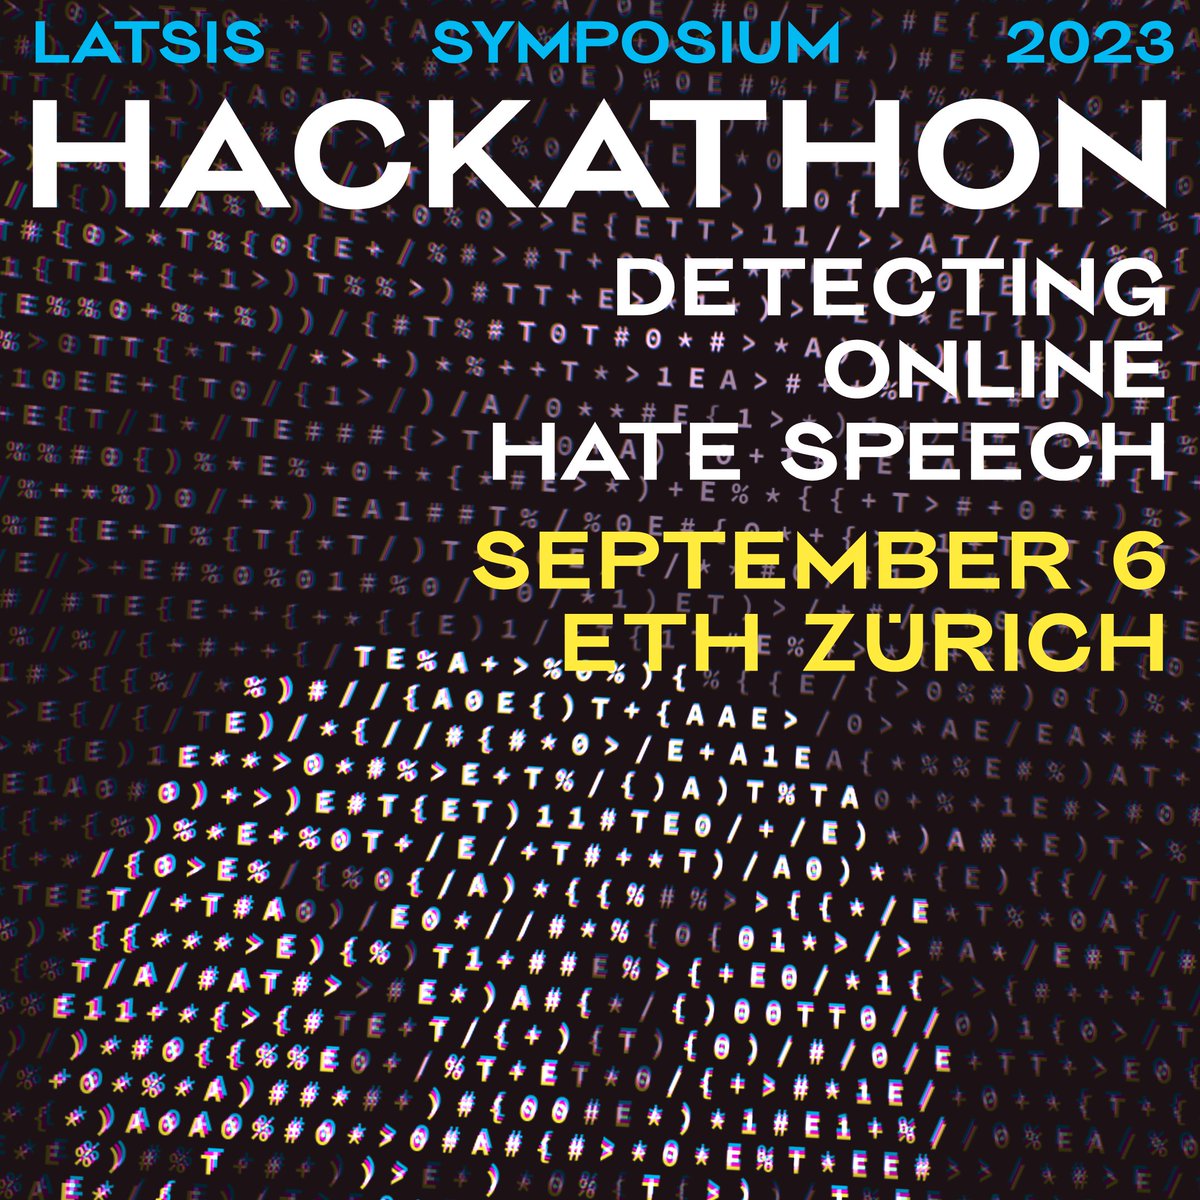 🚀 Ready to use your NLP skills for a greater cause? Join us at the Hackathon on Detecting Online Hate Speech on September 6, 2023, at ETH Zurich. Let's create safer, more inclusive online spaces together! #Hackathon #ETHZurich #OnlineSafety #aiforgood latsis2023.ethz.ch/hackathon.html